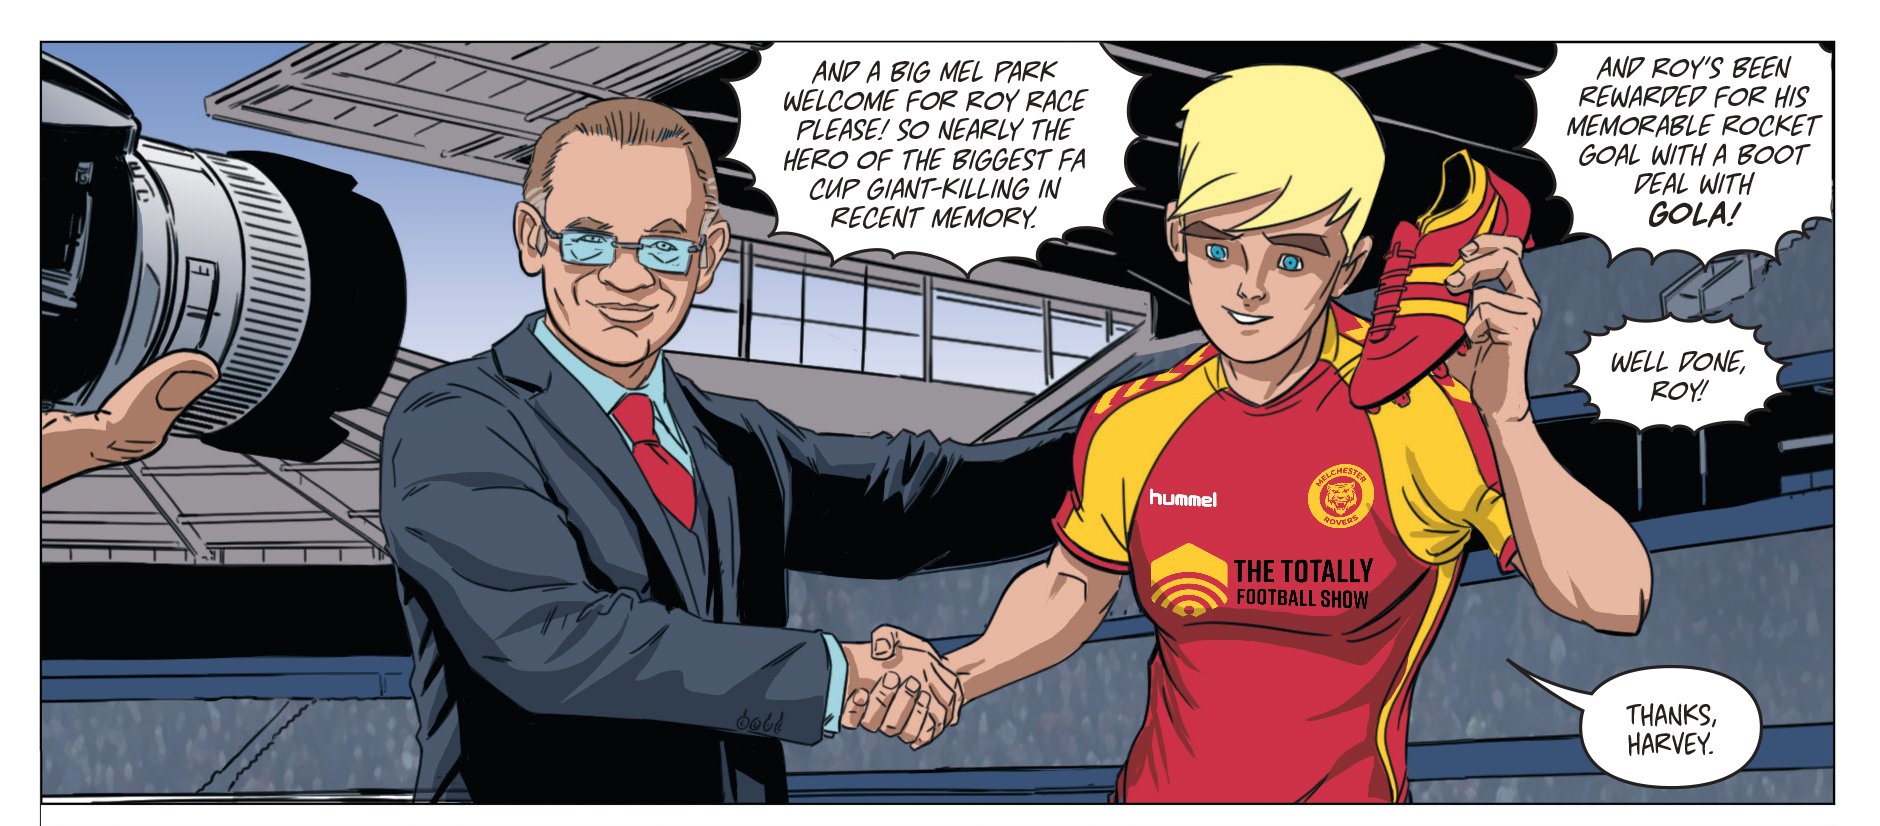 Gola's Harvey Jacobson with Roy Race in the upcoming graphic novel "Roy of the Rovers: Foul Play", on sale next month